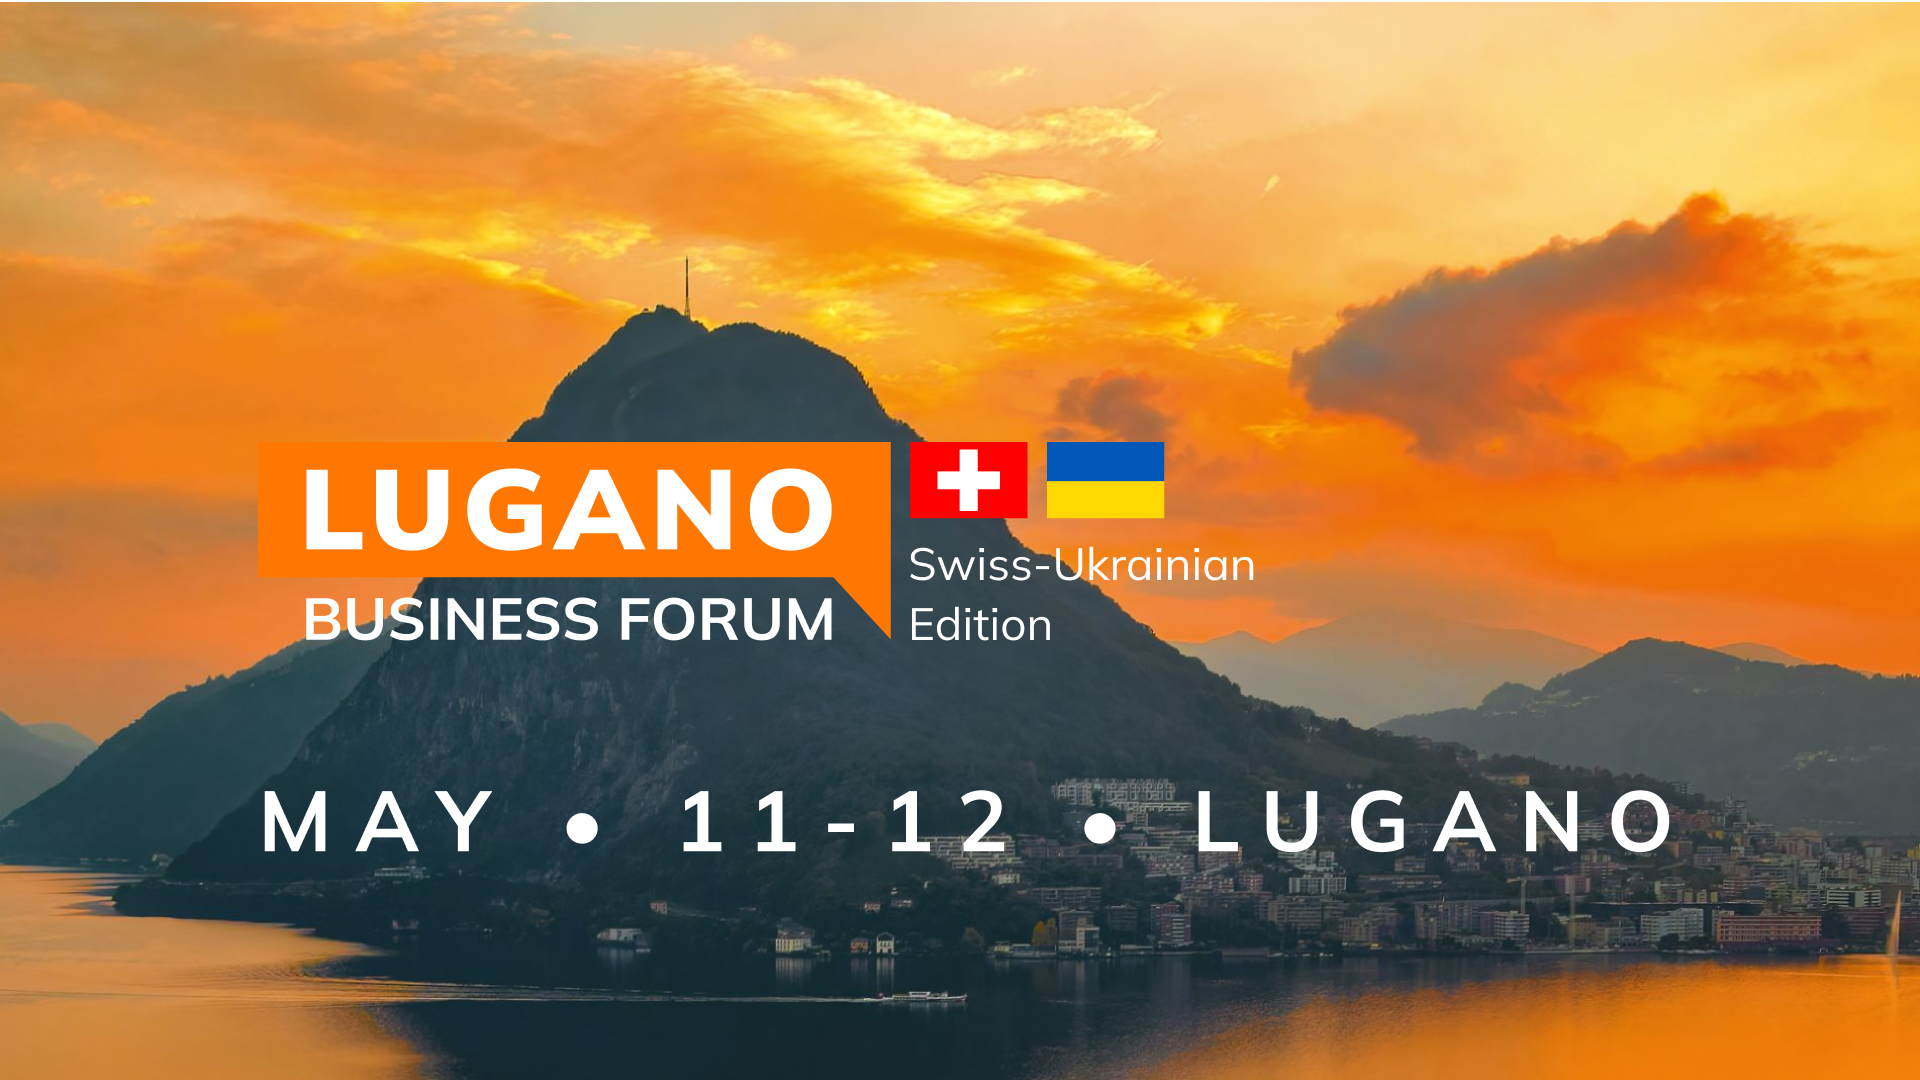 On May 11-12, Switzerland will host the international Lugano Business Forum in support of Ukrainian business cover